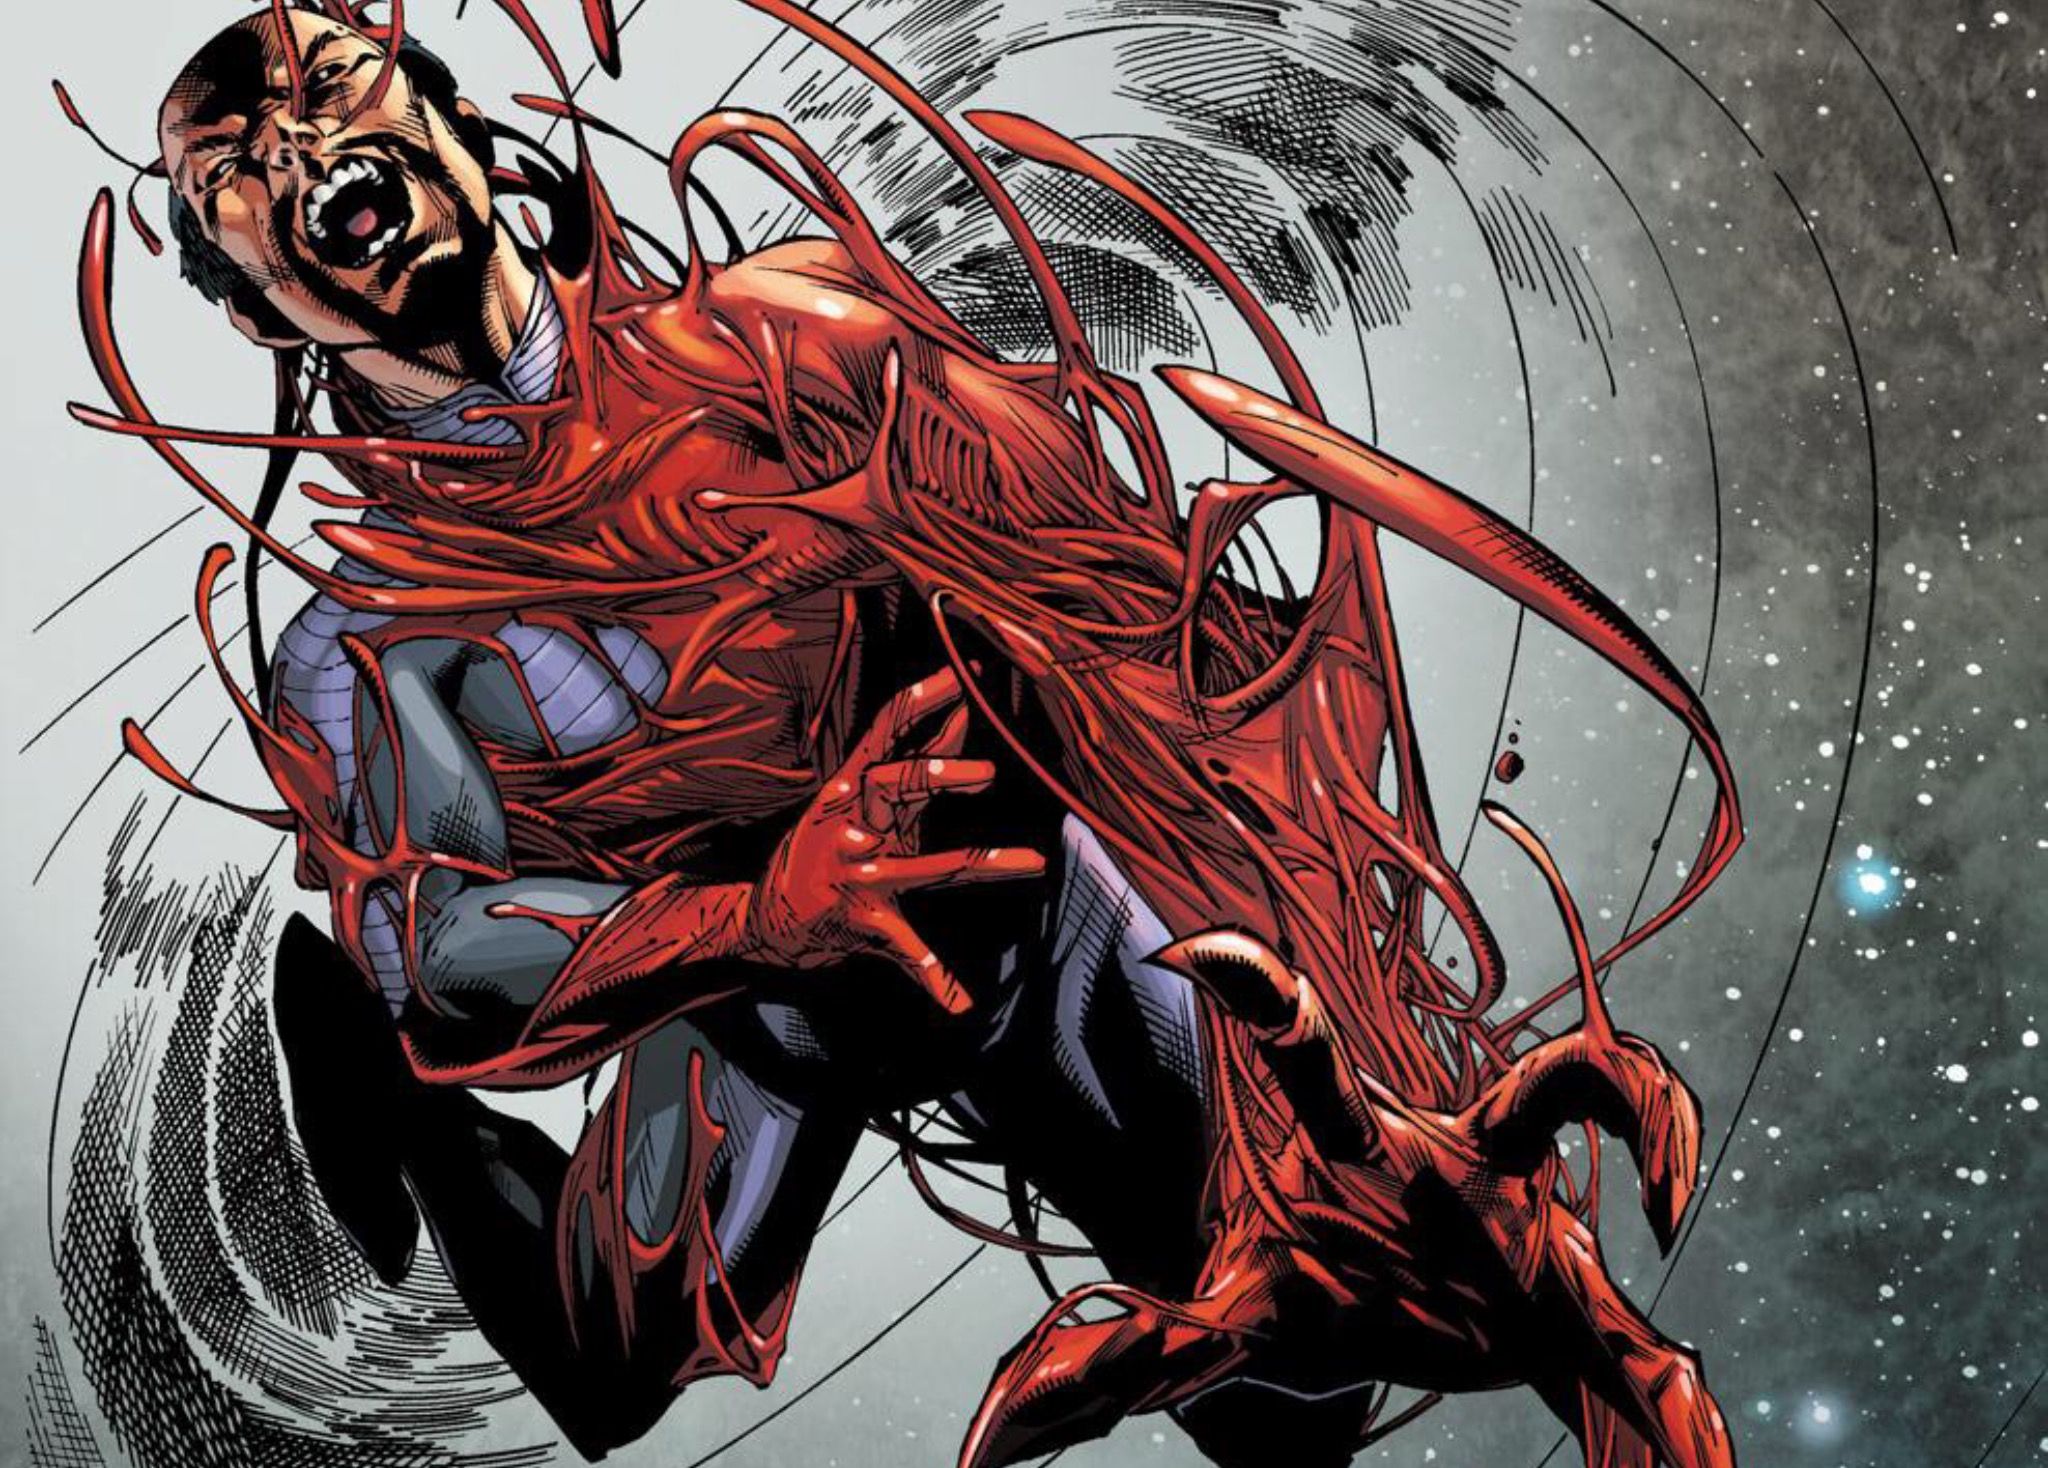 The Wizard becomes Carnage in Superior Carnage 5